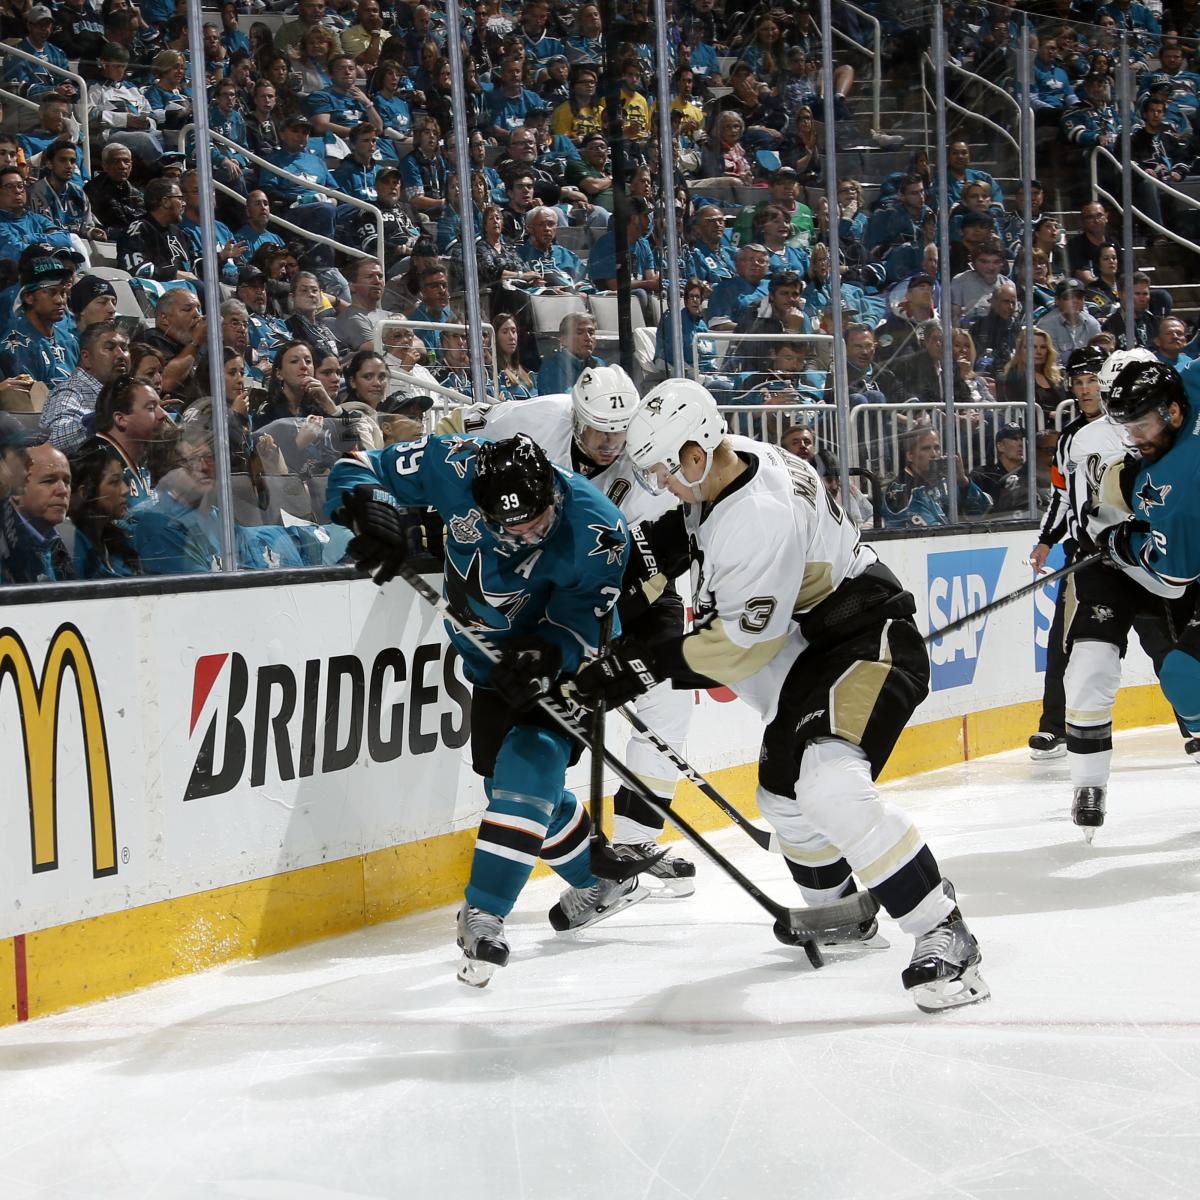 Penguins vs. Sharks Keys to Victory in Game 6 of NHL Stanley Cup Final